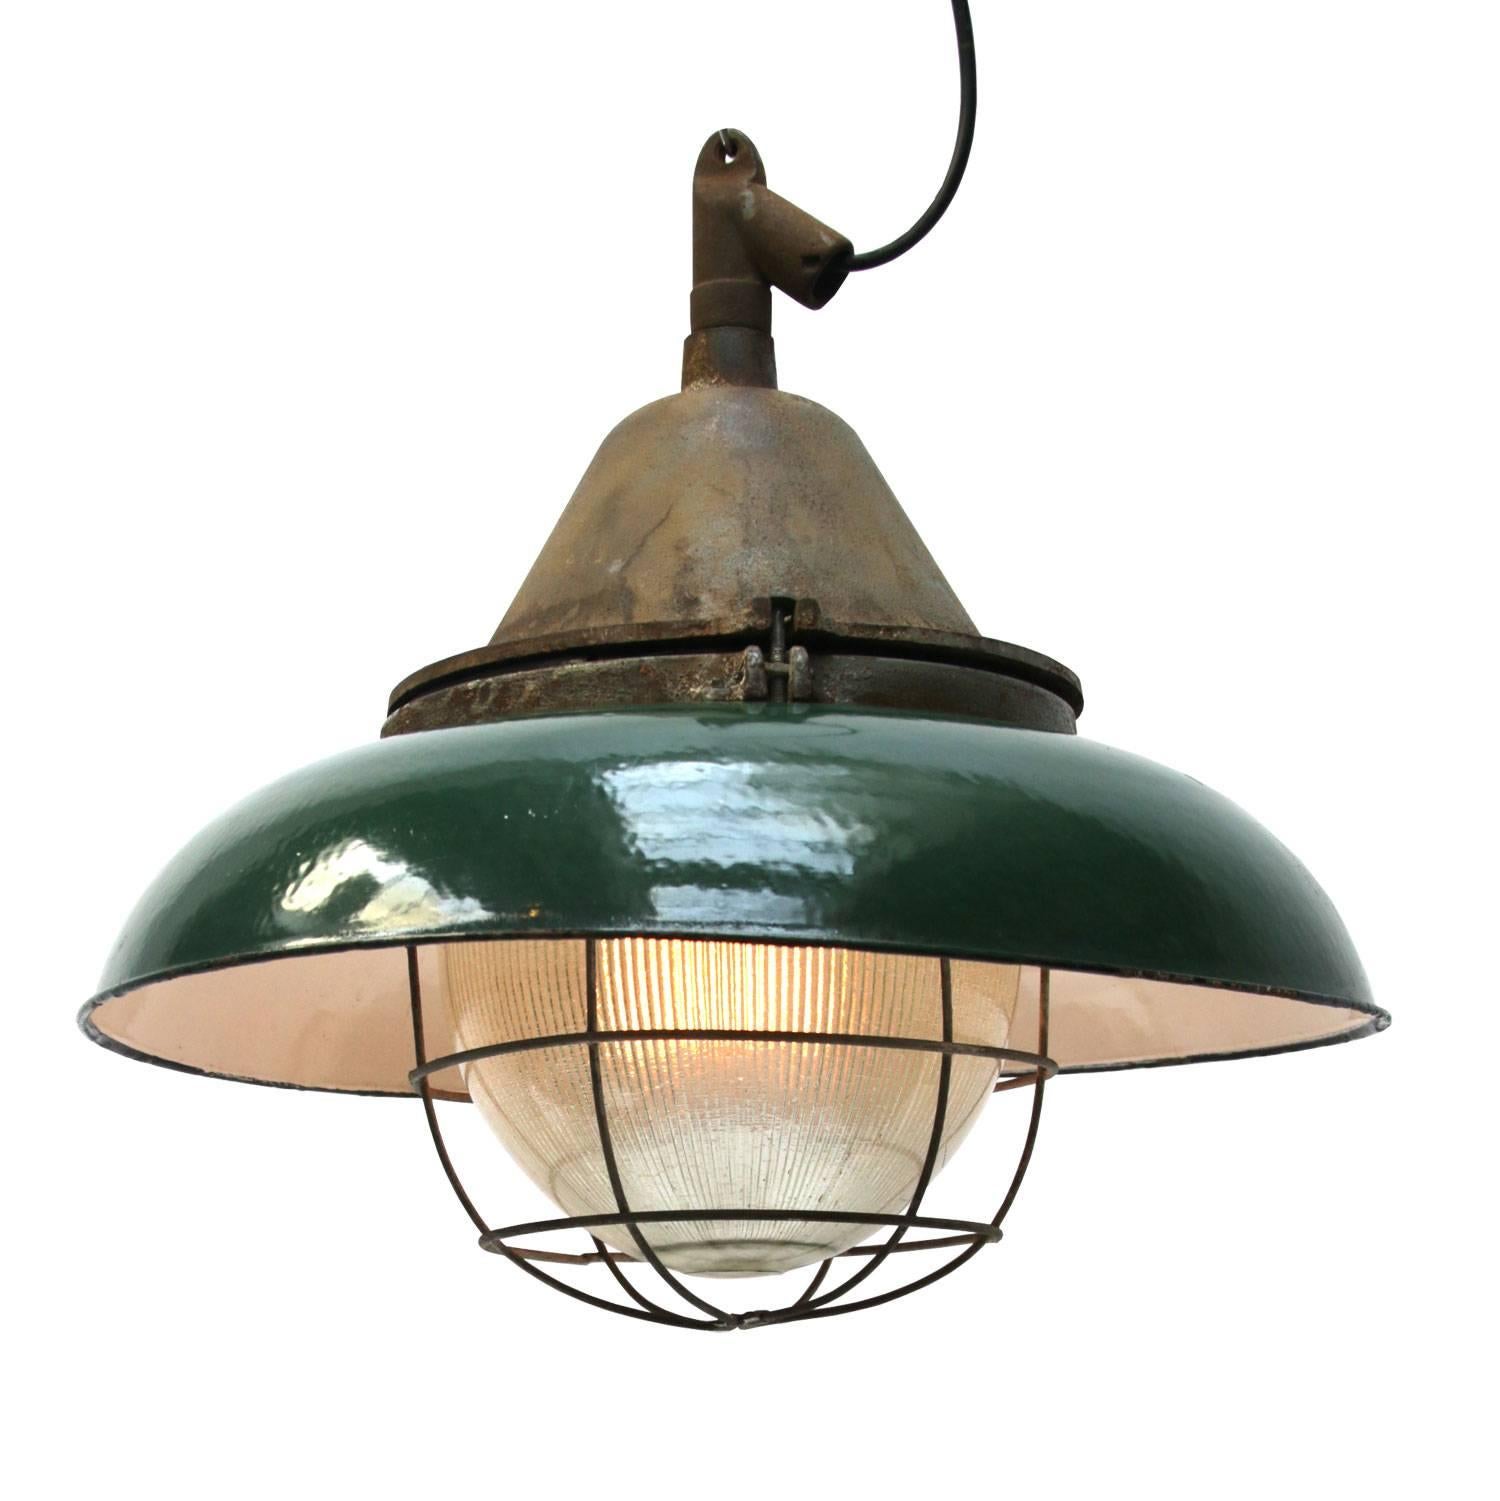 Homi extra large green. Industrial factory pendant. Green enamel shade. Cast iron top with striped glass.

Measure: Weight 9.0 kg / 19.8 lb

All lamps have been made suitable by international standards for incandescent light bulbs,